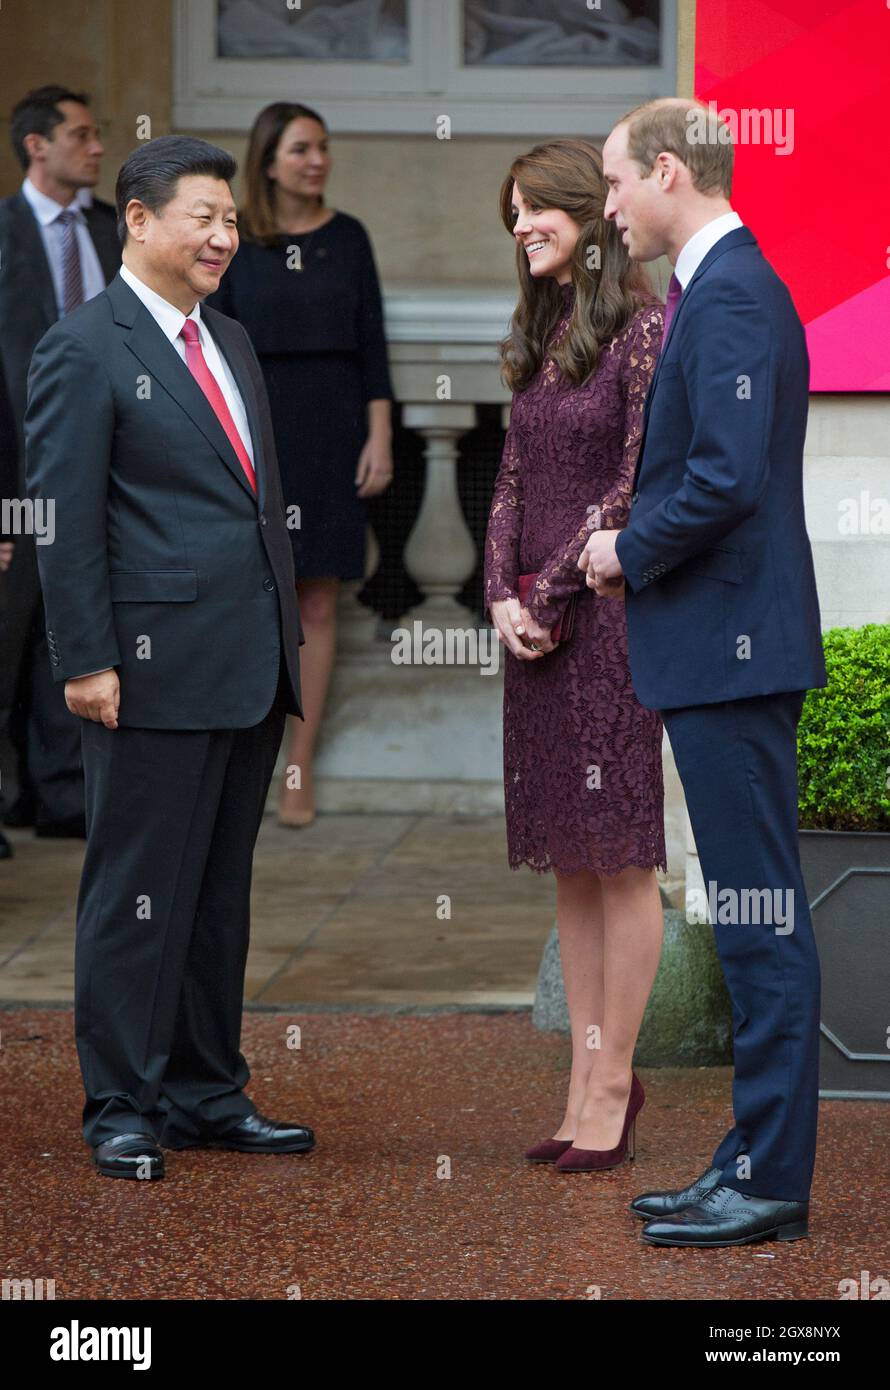 Catherine, Duchess of Cambridge and Prince William, Duke of Cambridge greet President of China Mr Xi Jinping and Madame Peng Liyuan at a creative industry event at Lancaster House in London on October 21, 2015.   Stock Photo